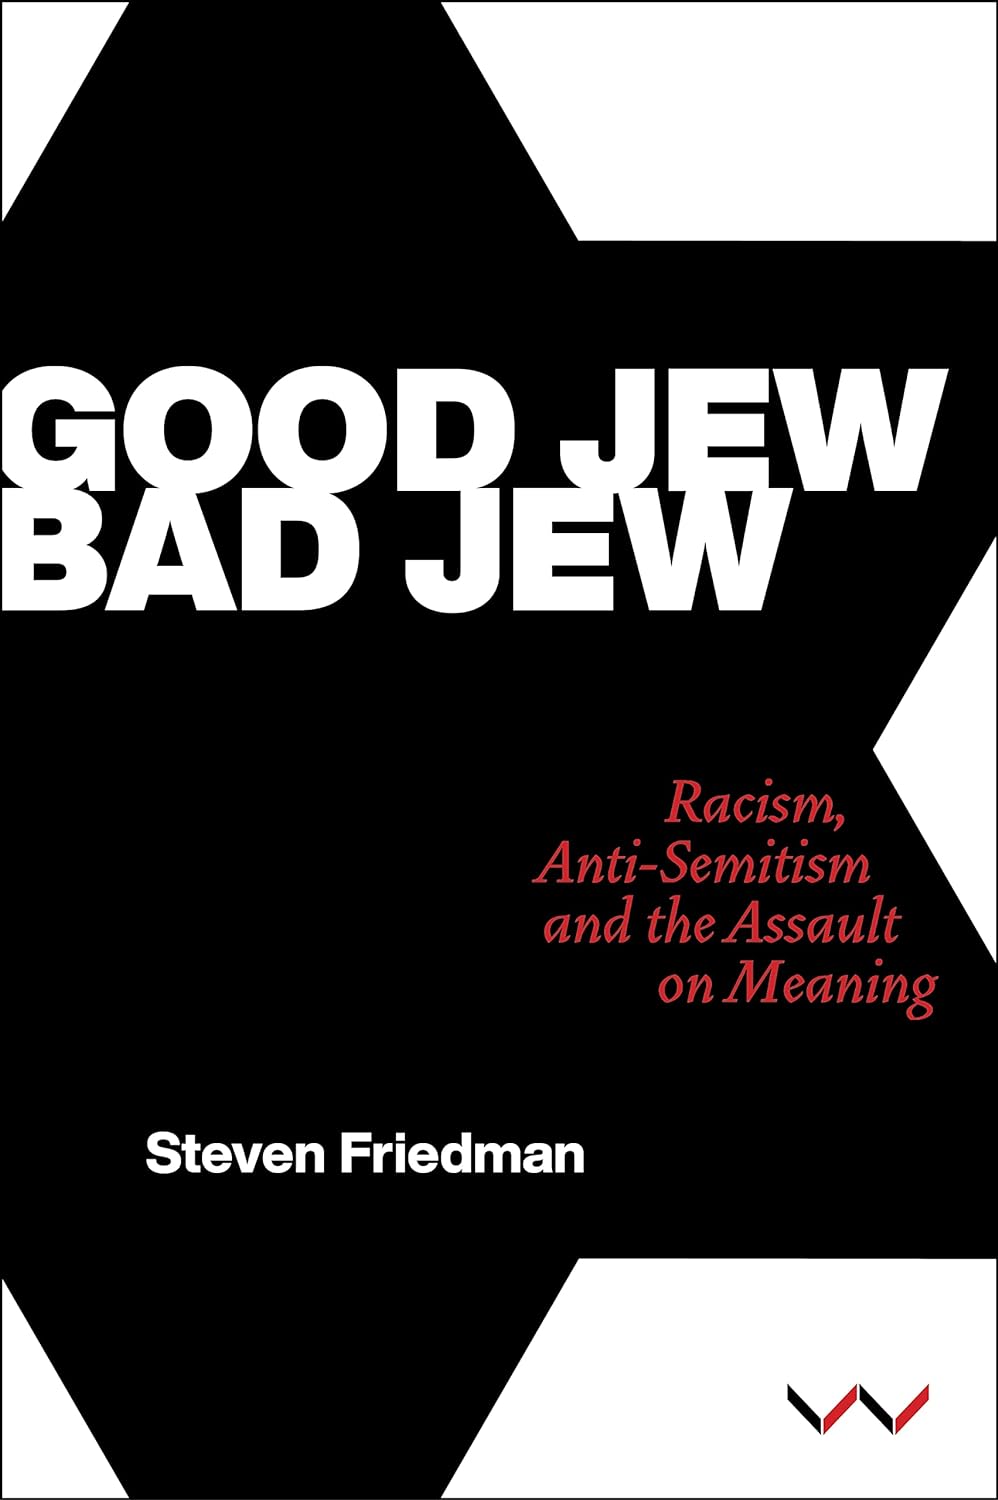 Good Jew Bad Jew — Racism, Anti-Semitism and the Assault on Meaning